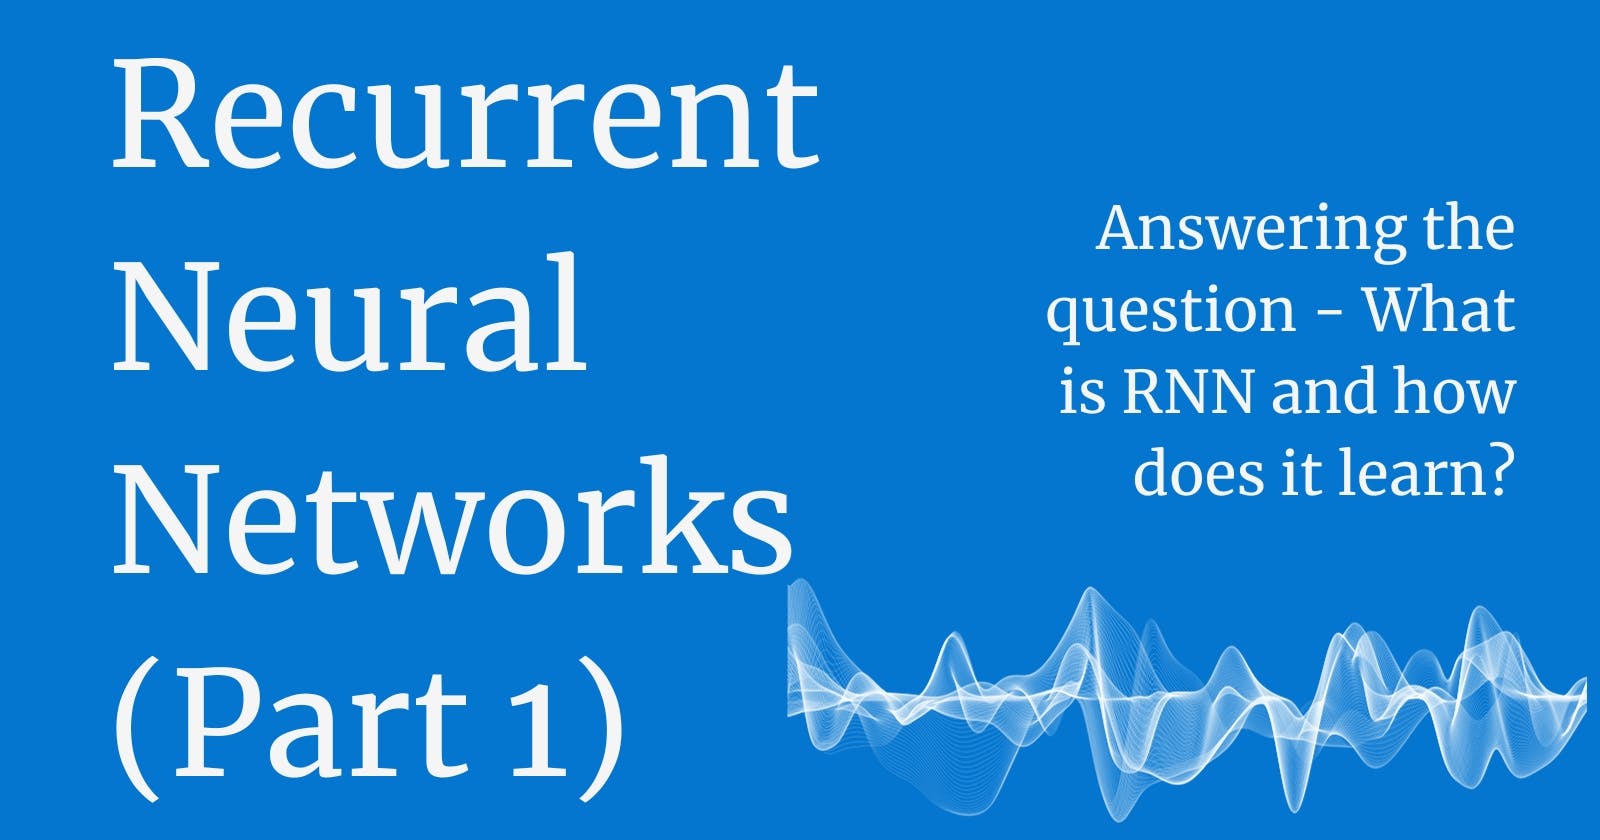 A Beginner's Guide to Recurrent Neural Networks (Part 1 of 2)